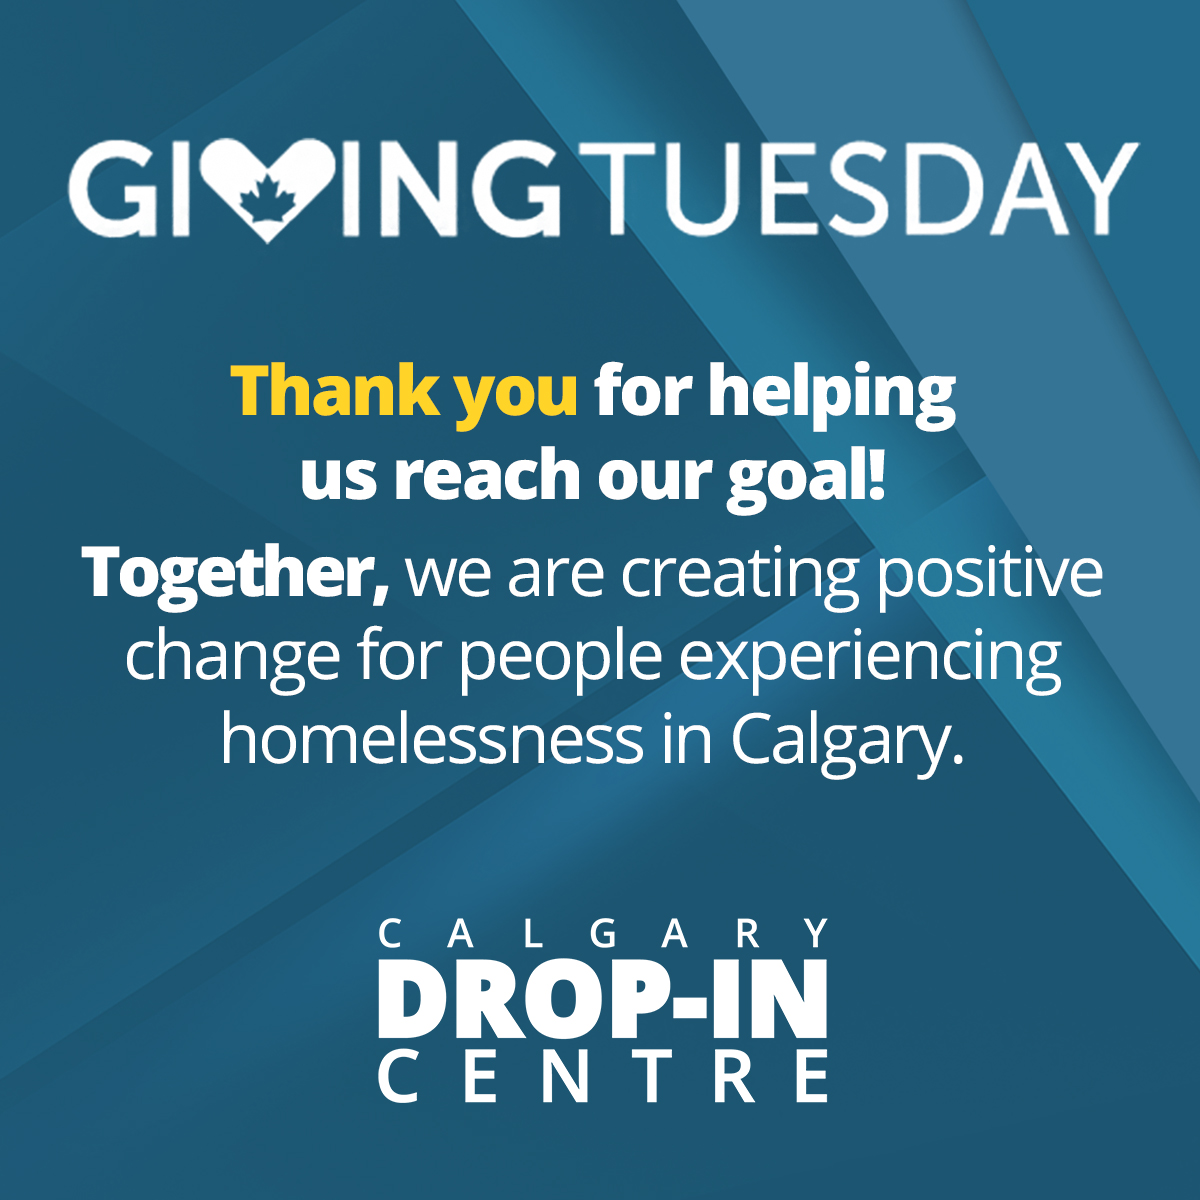 We are grateful beyond words for the incredible support shown this #GivingTuesday! Your generosity and kindness make a real difference. Together, we are creating positive change for people experiencing homelessness in Calgary.